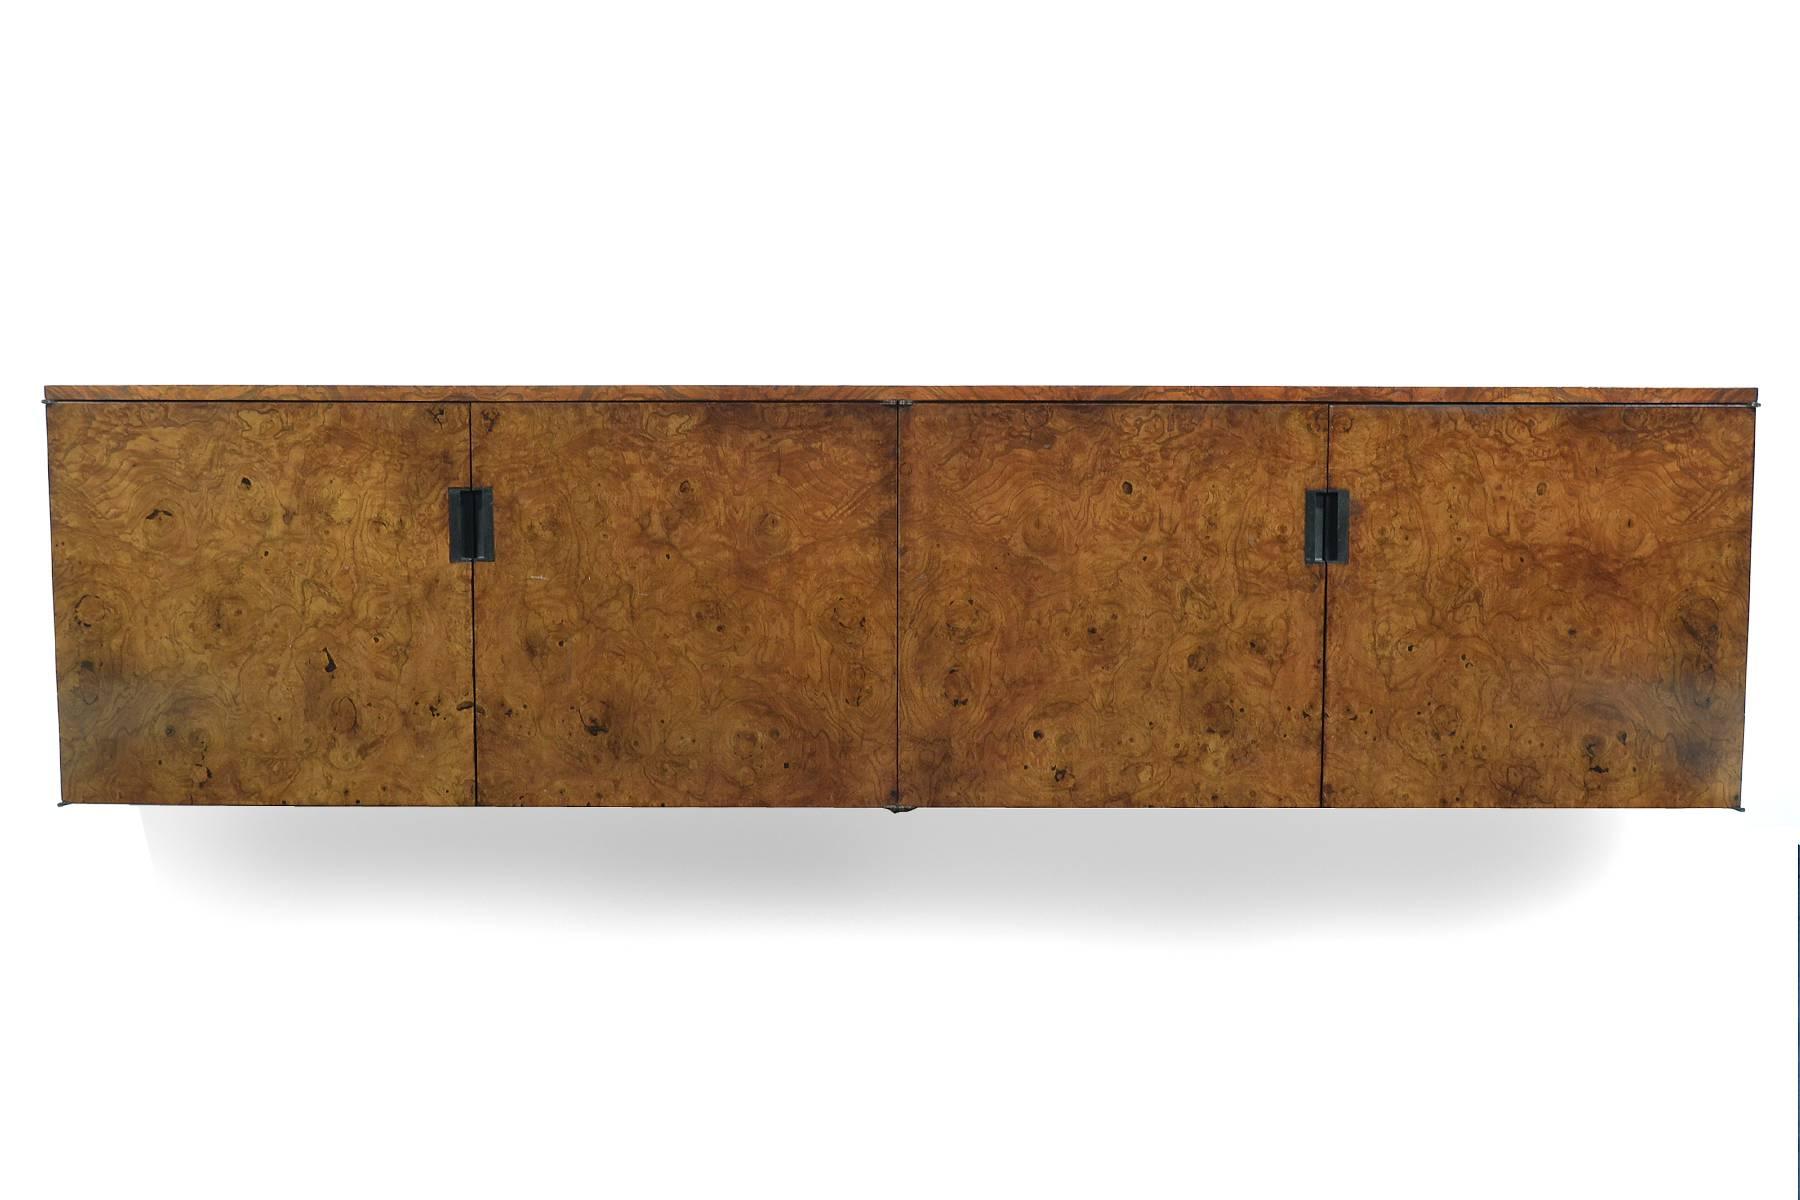 This handsome Sprunger wall-mounted credenza combines a Minimalist form and richly variegated burled olivewood. The cabinet features two doors concealing two adjustable shelves and two shallow drawers. The pulls are a very attractive inset design